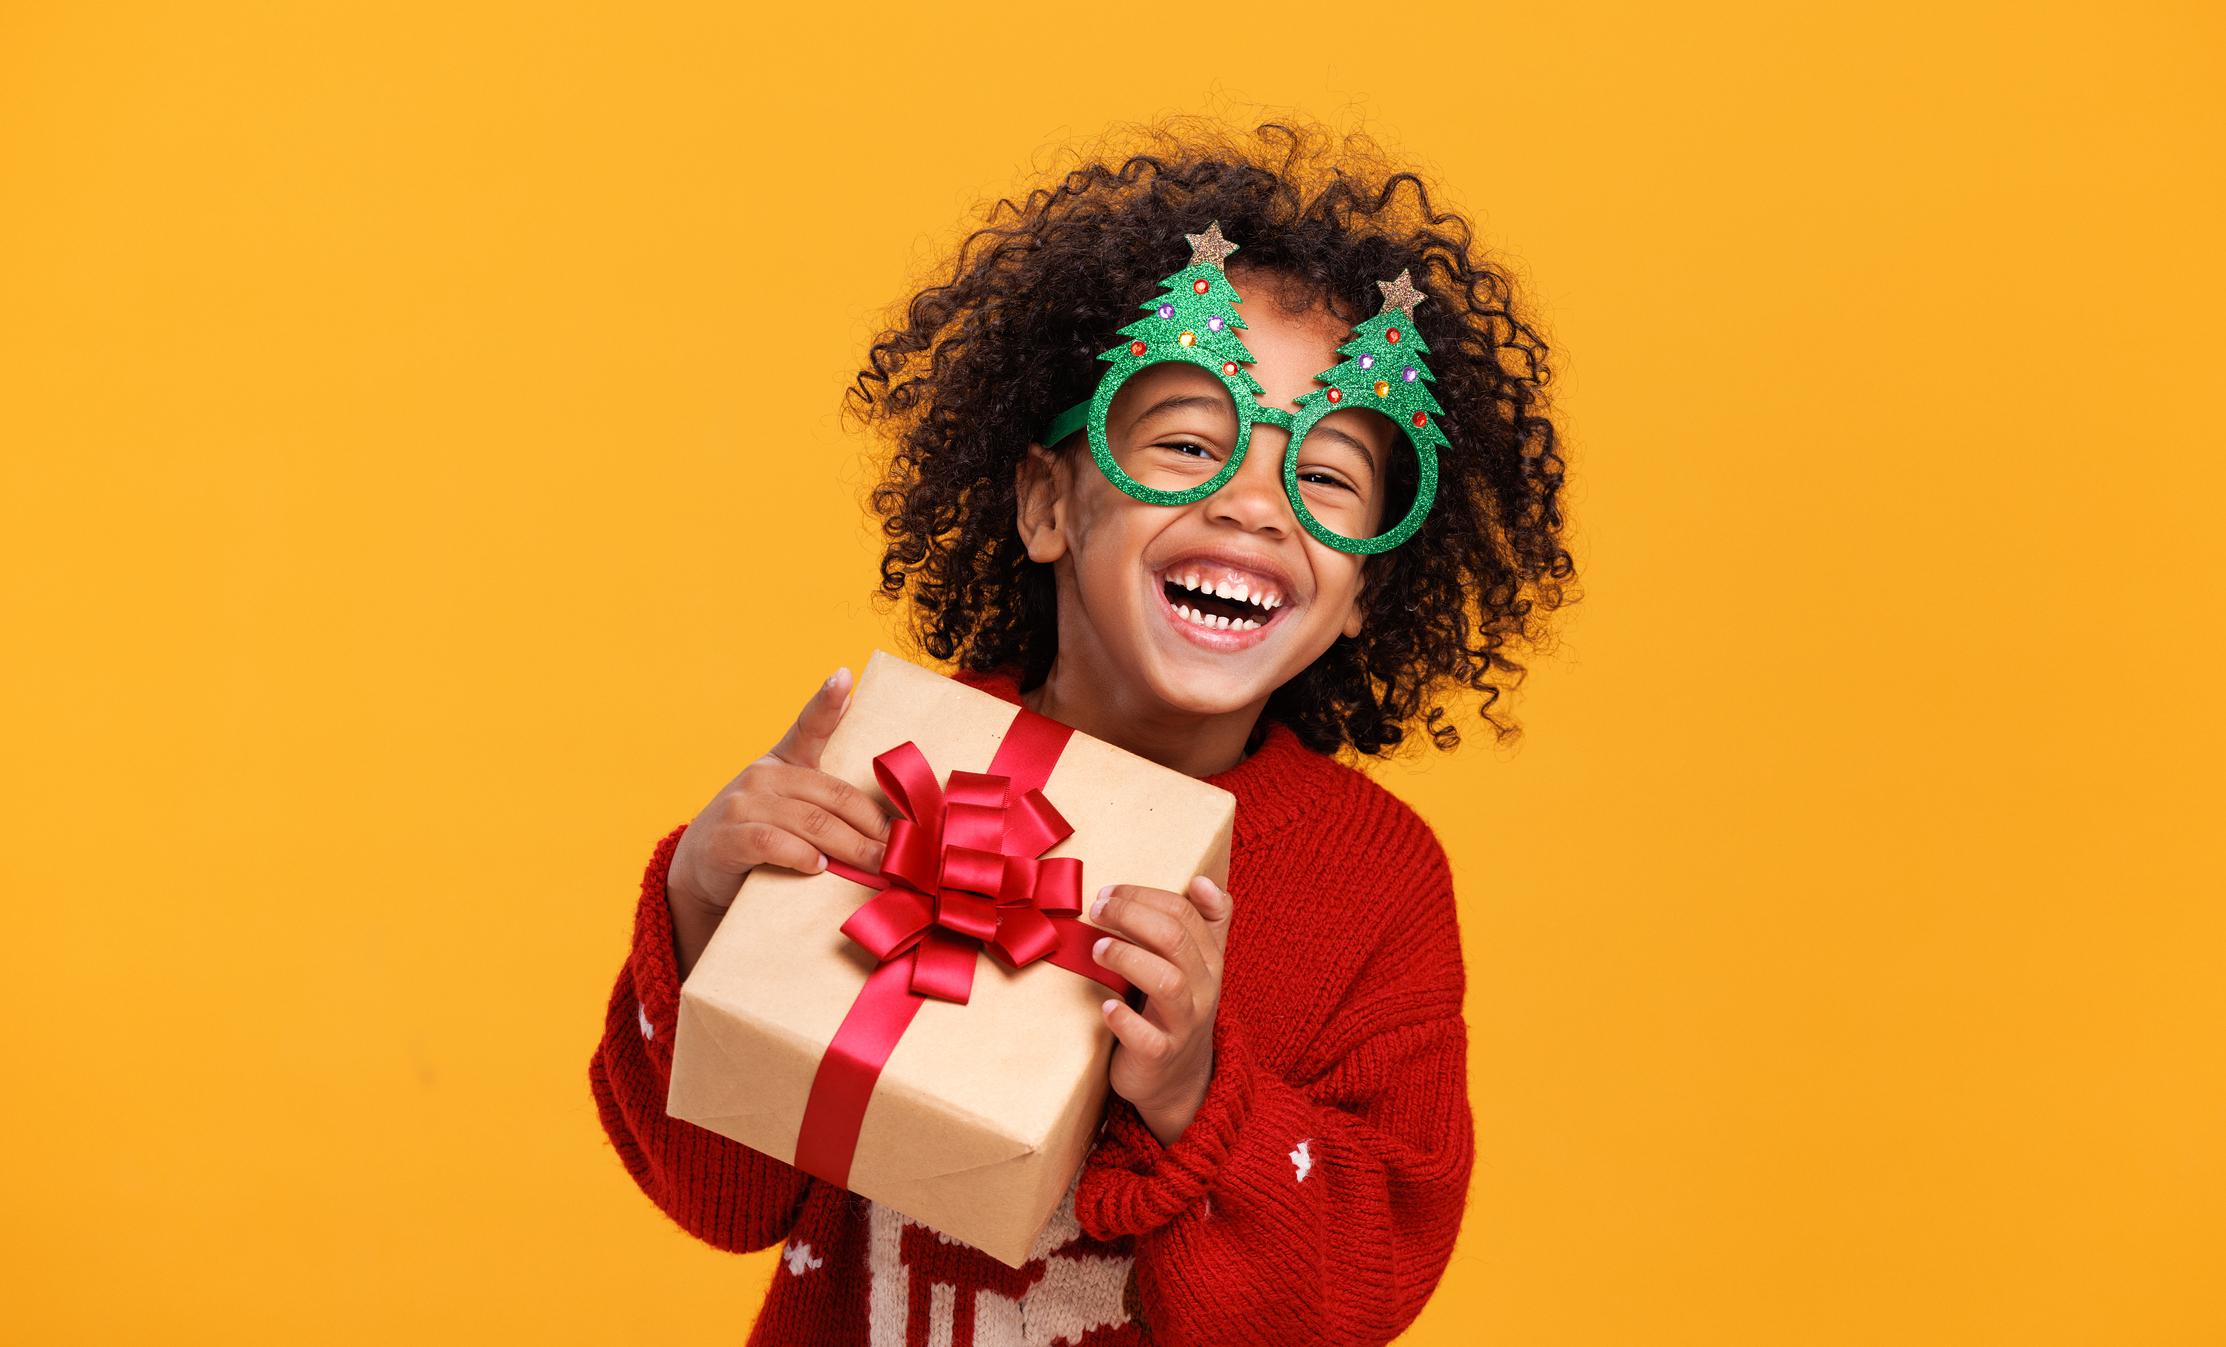  A boy wearing funny glasses in form of Christmas trees laughing while holding xmas gift box, having fun while standing yellow background 